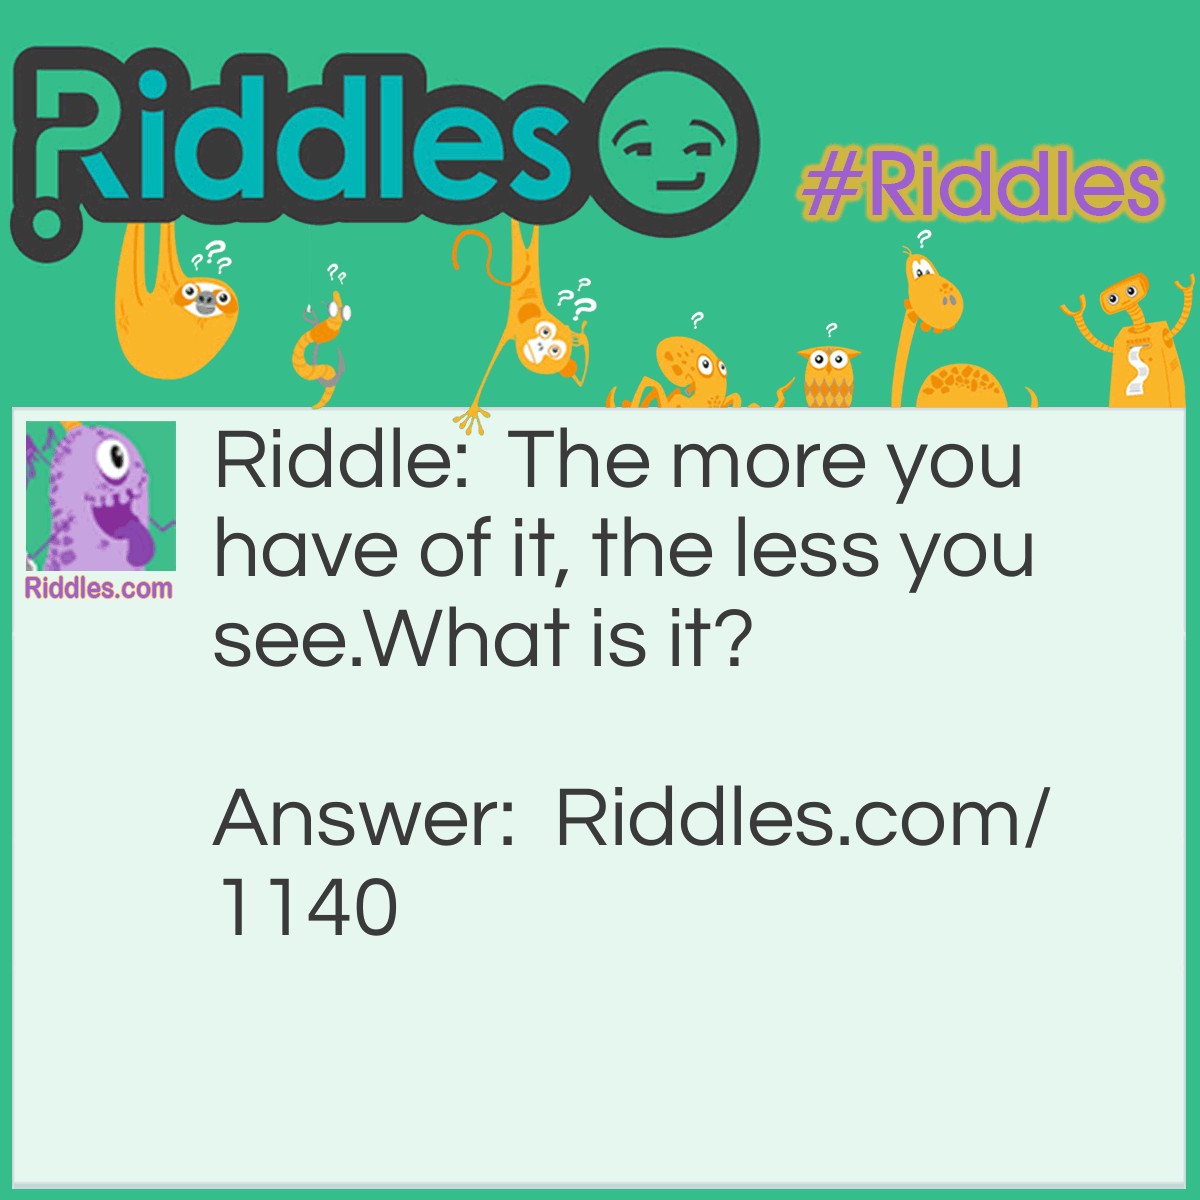 Riddle: The more you have of it, the less you see.
What is it? Answer: Darkness